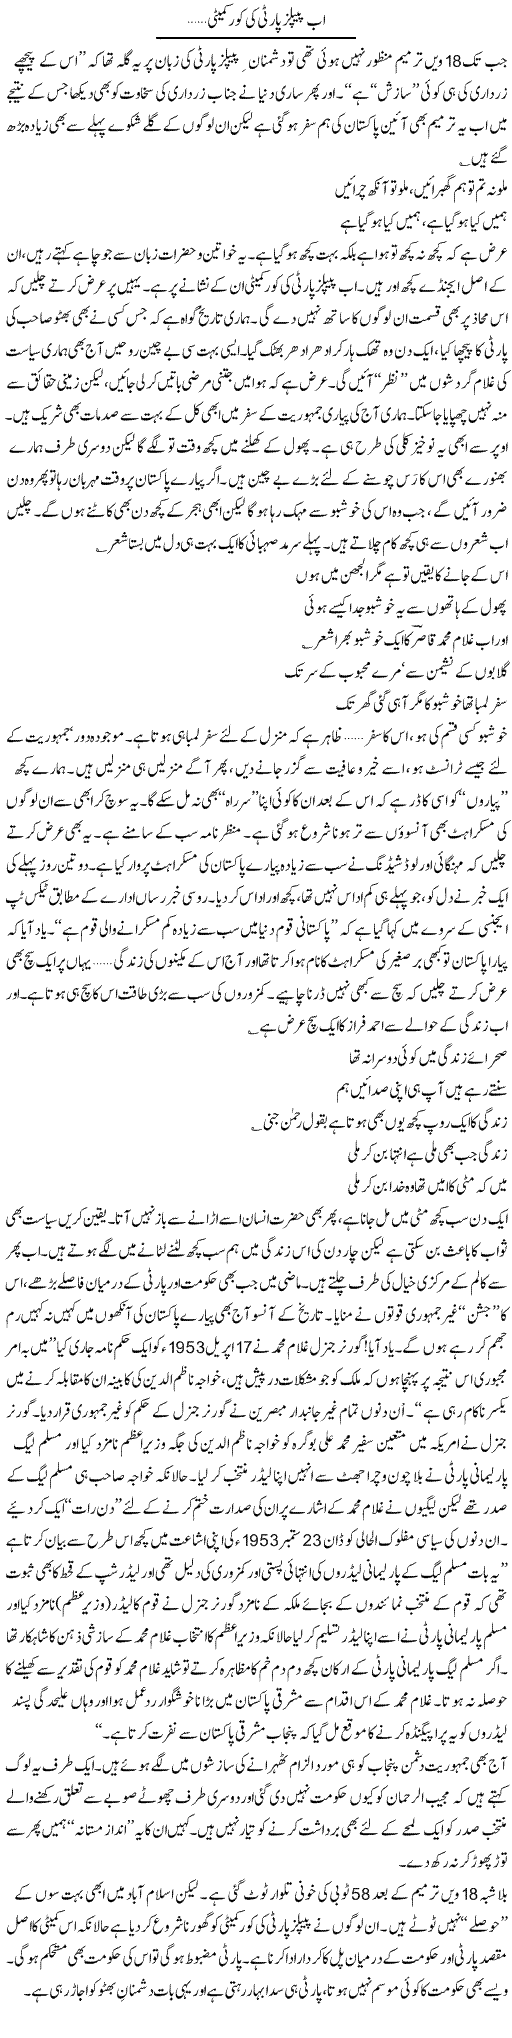 People Party Committee Express  Column Ijaz Hafeez 10 May 2010